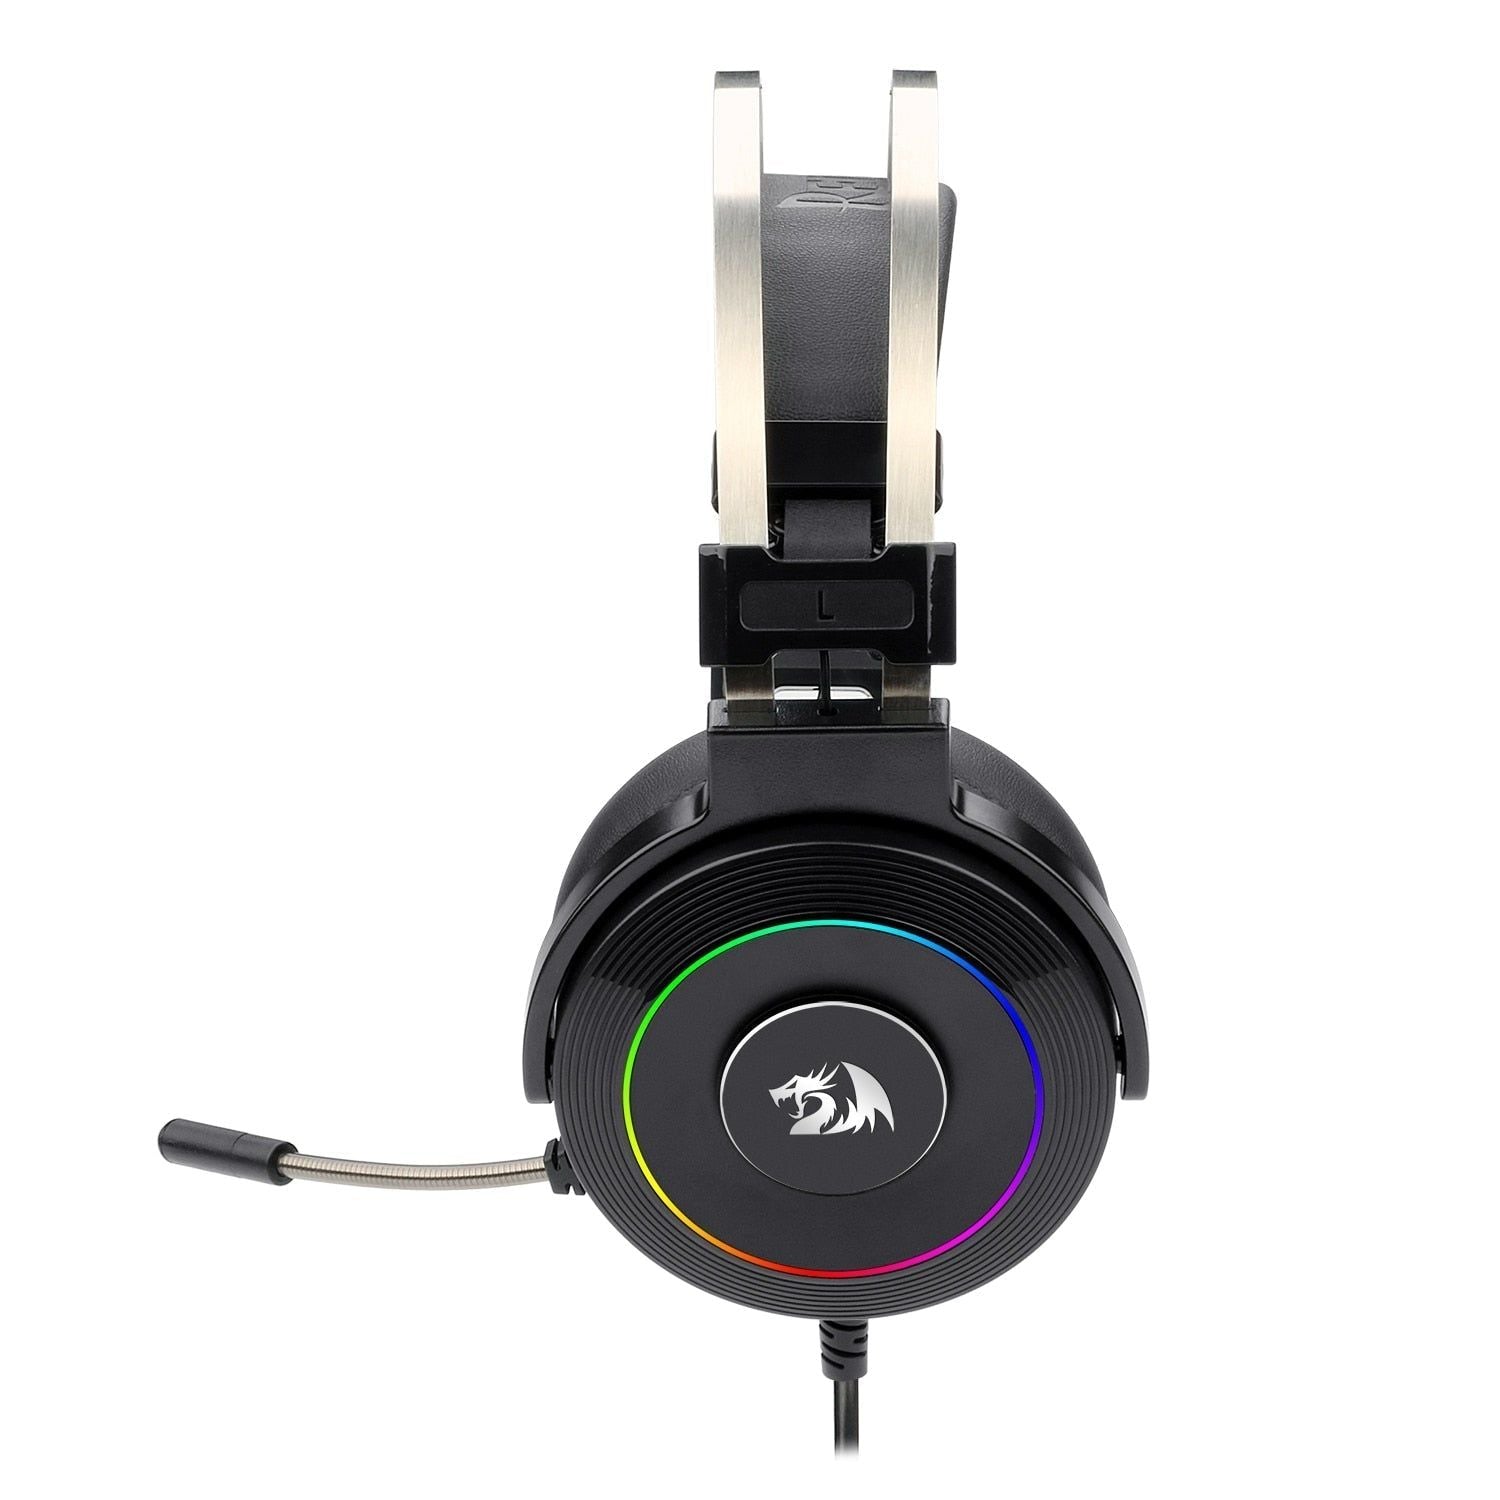 H320 Lamia Gaming Headset 7.1 Surround With Noise Cancelling and RGB Light for PC/PS4 | Hifi Media Store